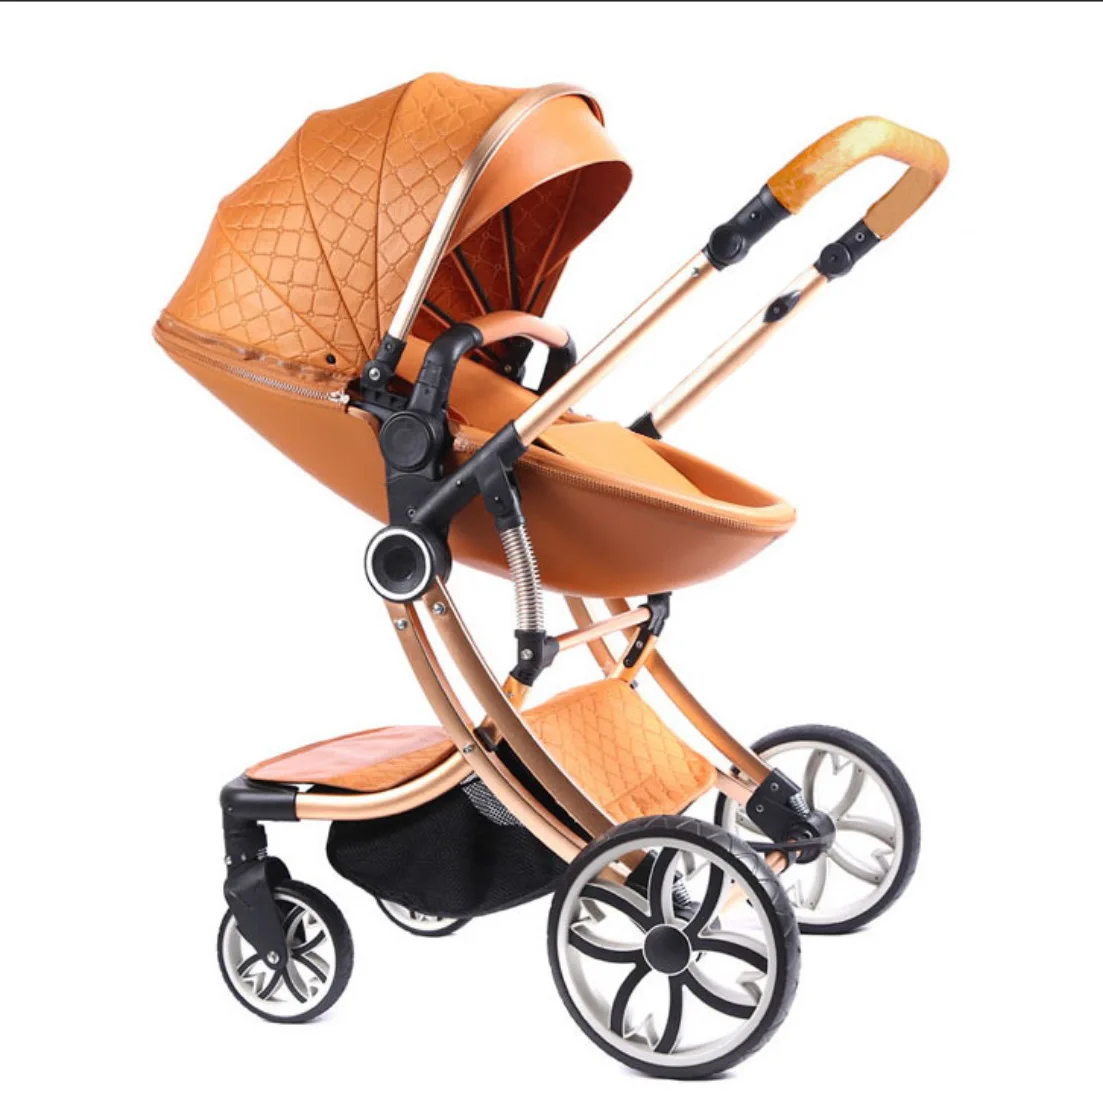 Baby stroller can sit, lie, fold, light, high-view, two-way newborn baby stroller with shock absorption for 0-6 months.